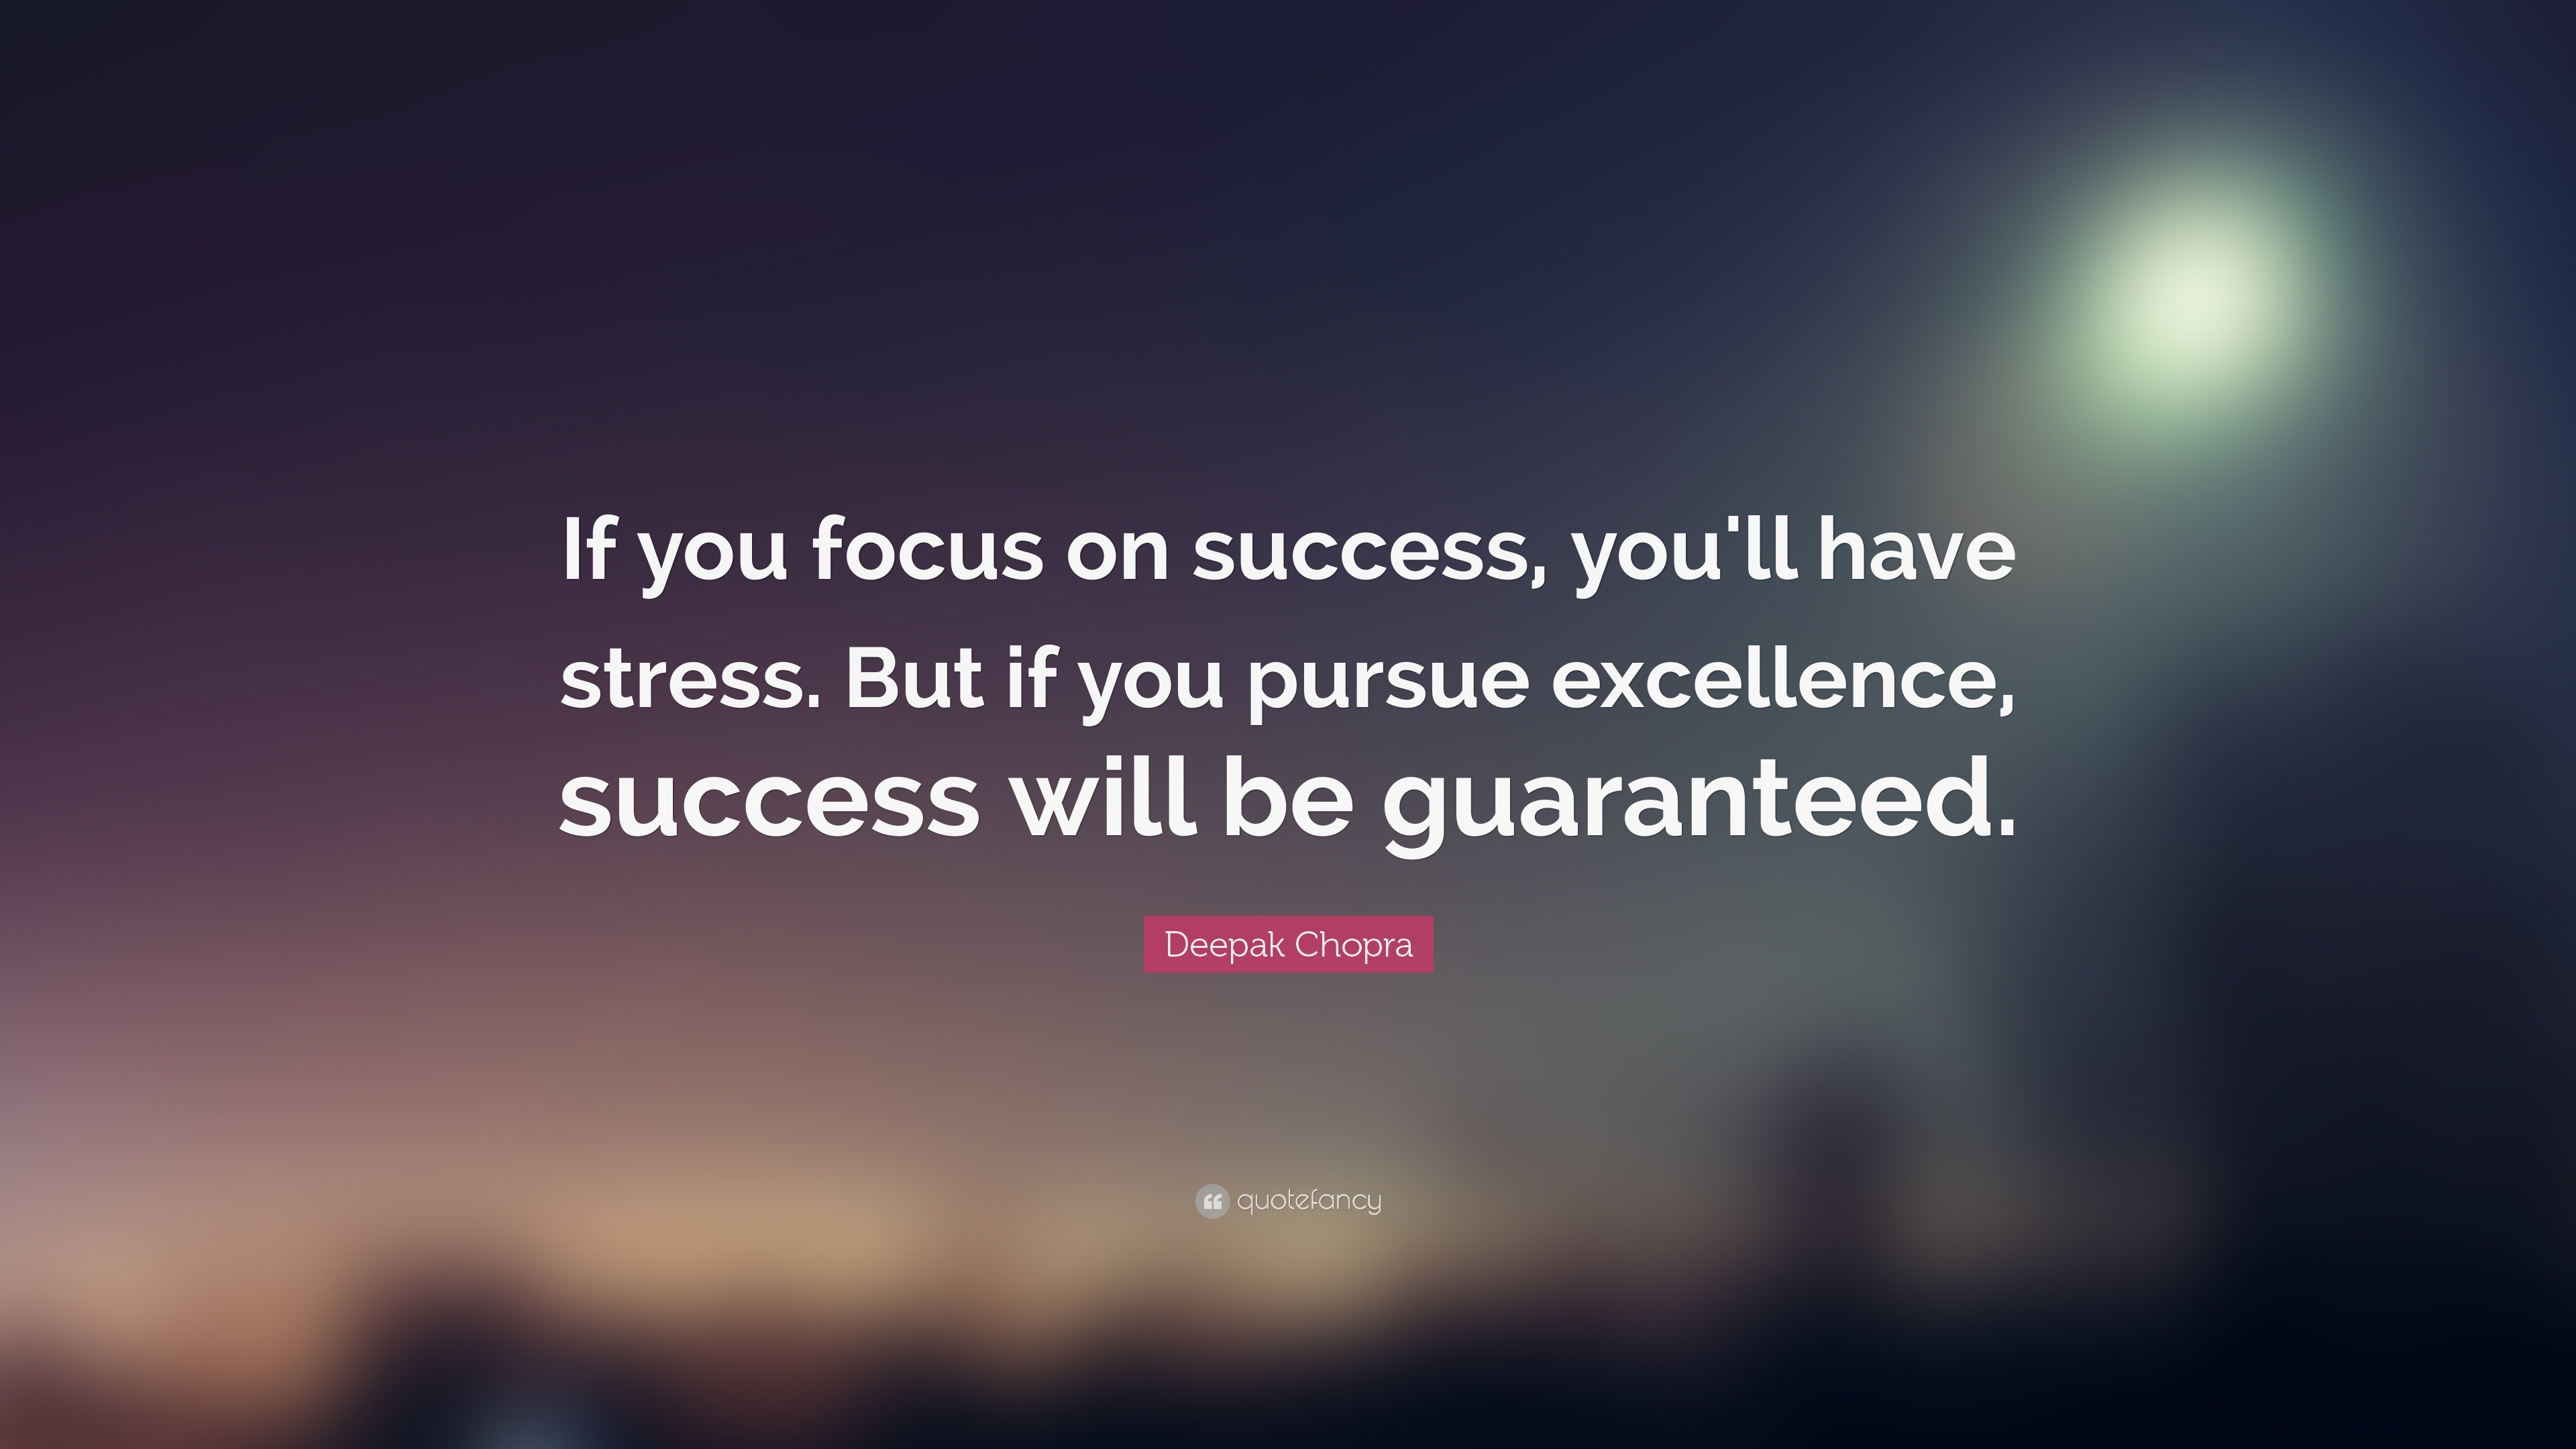 Deepak Chopra Quote: “If you focus on success, you’ll have stress. But ...